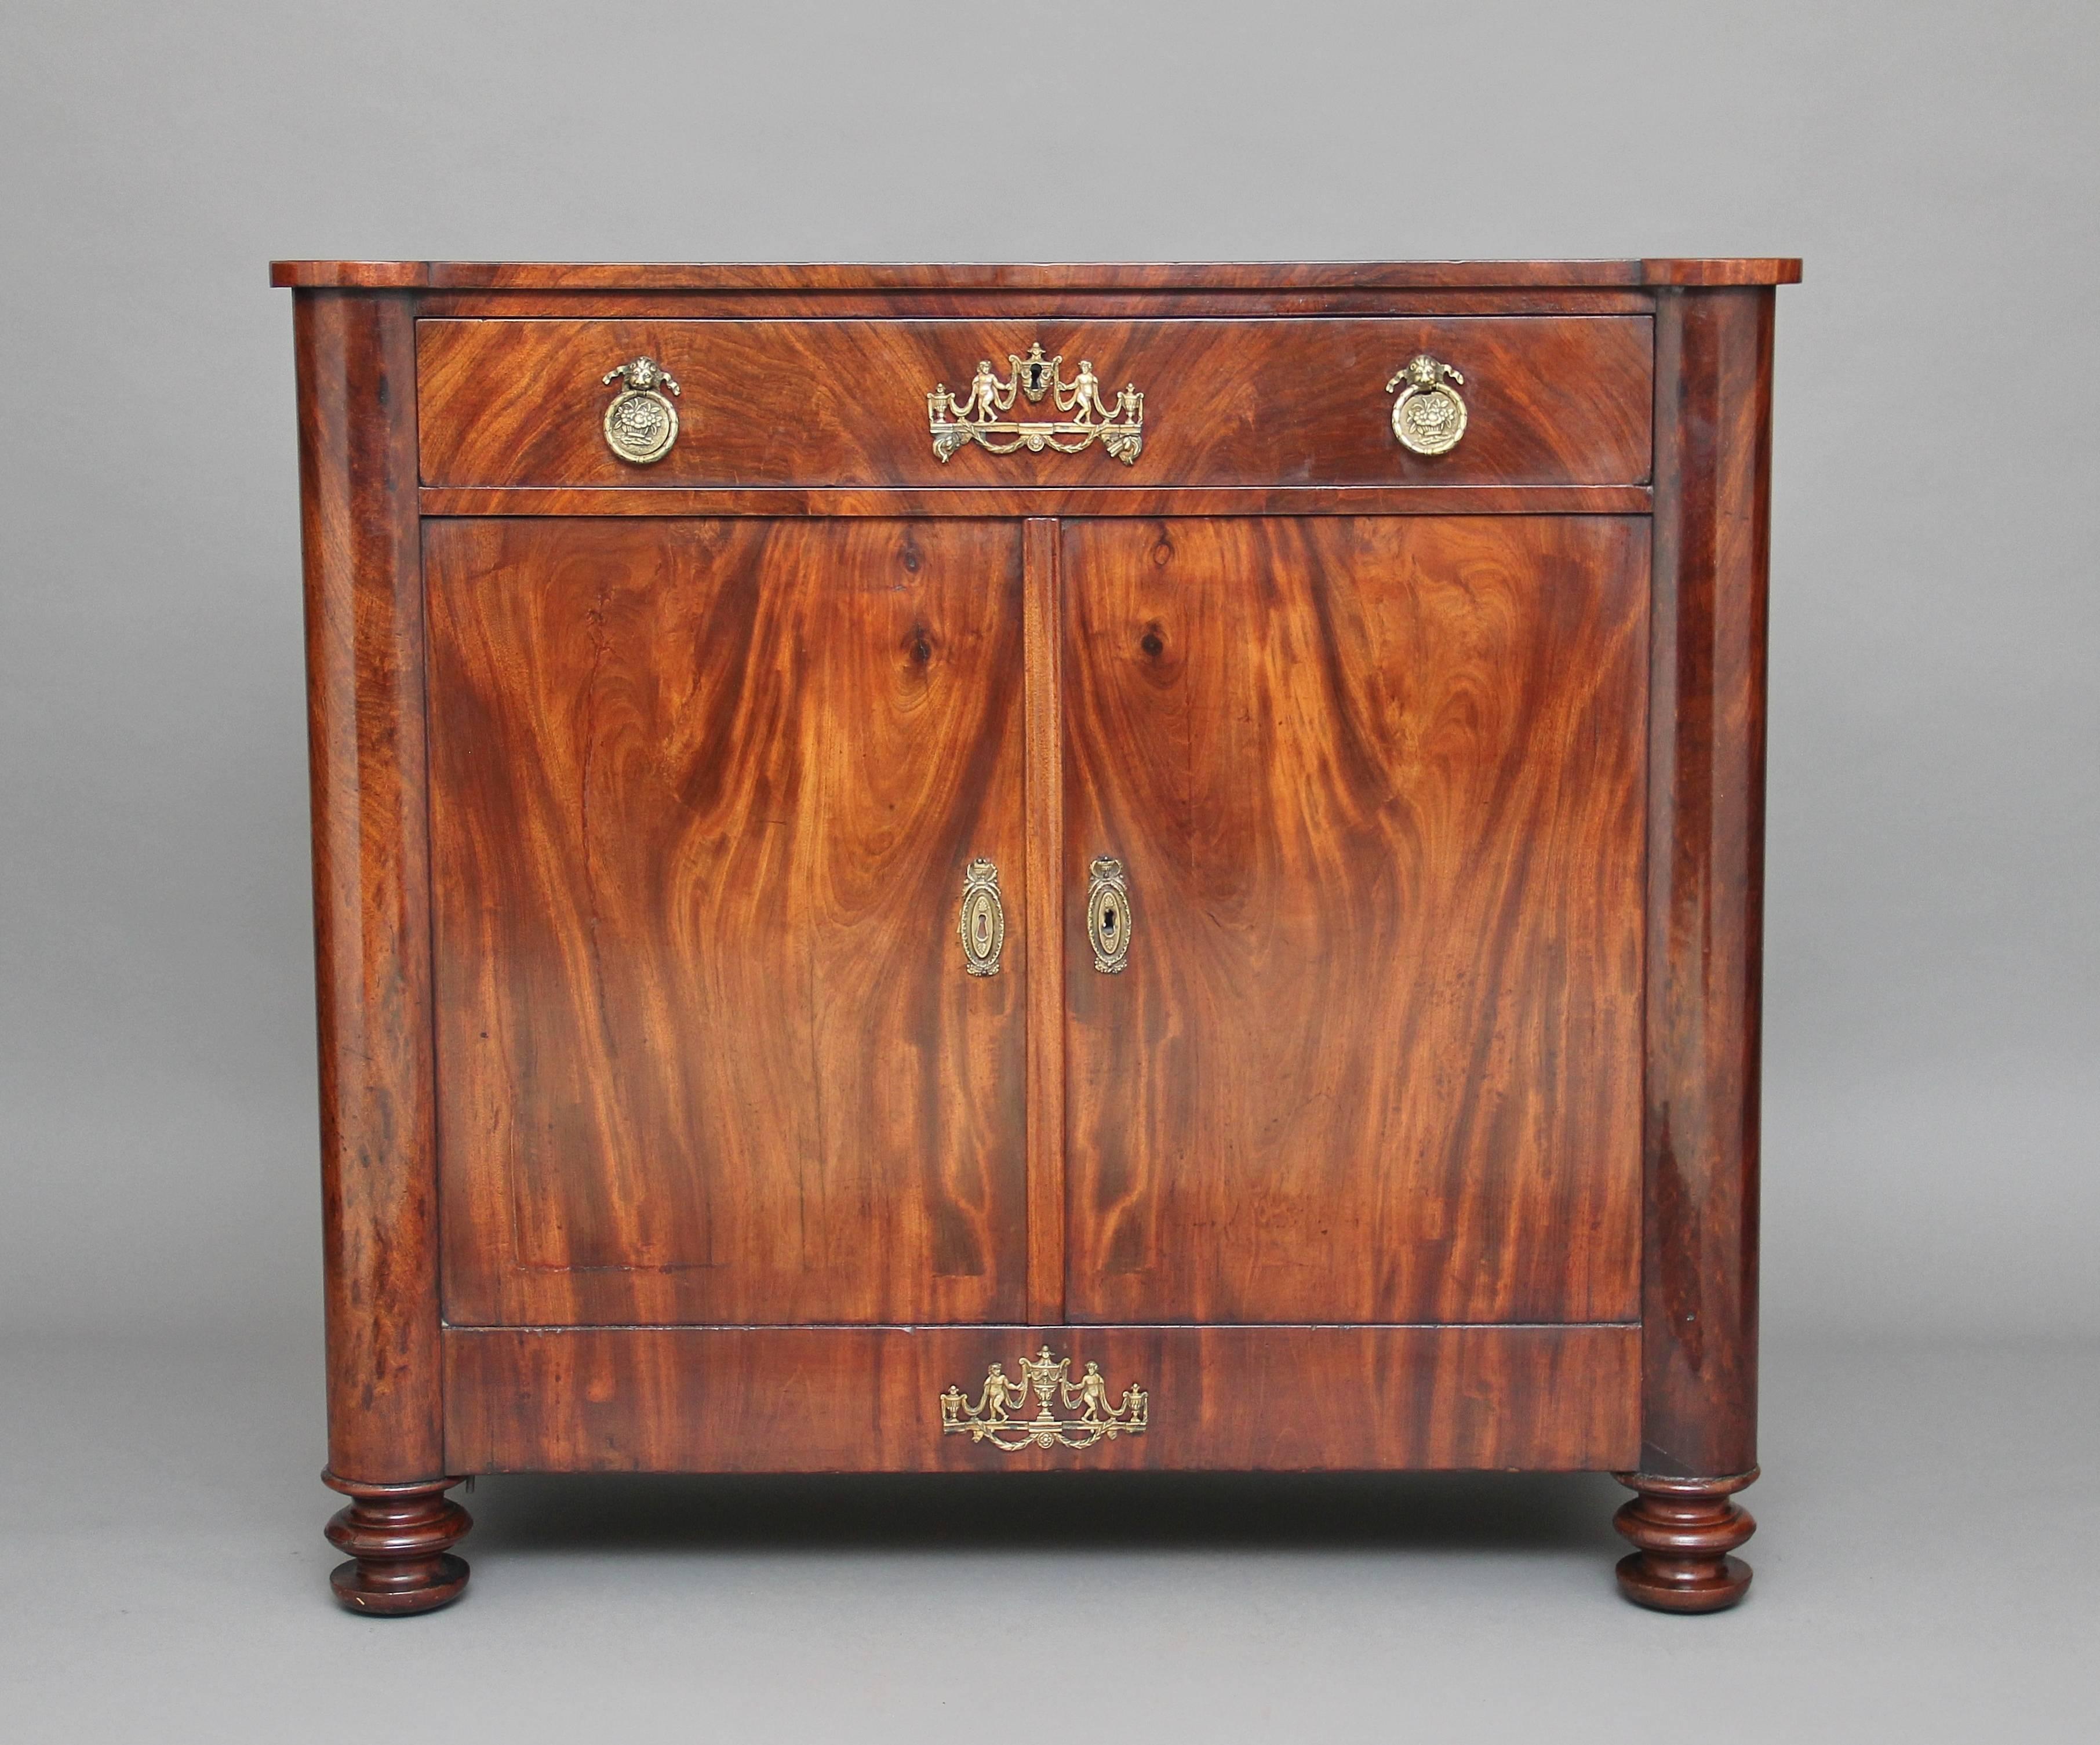 19th century French mahogany cabinet, having a single drawer above a two door cupboard with a single shelf inside, the drawer and doors having brass mask handles, oval escutcheons and applied decoration, flanked either side by half columns,